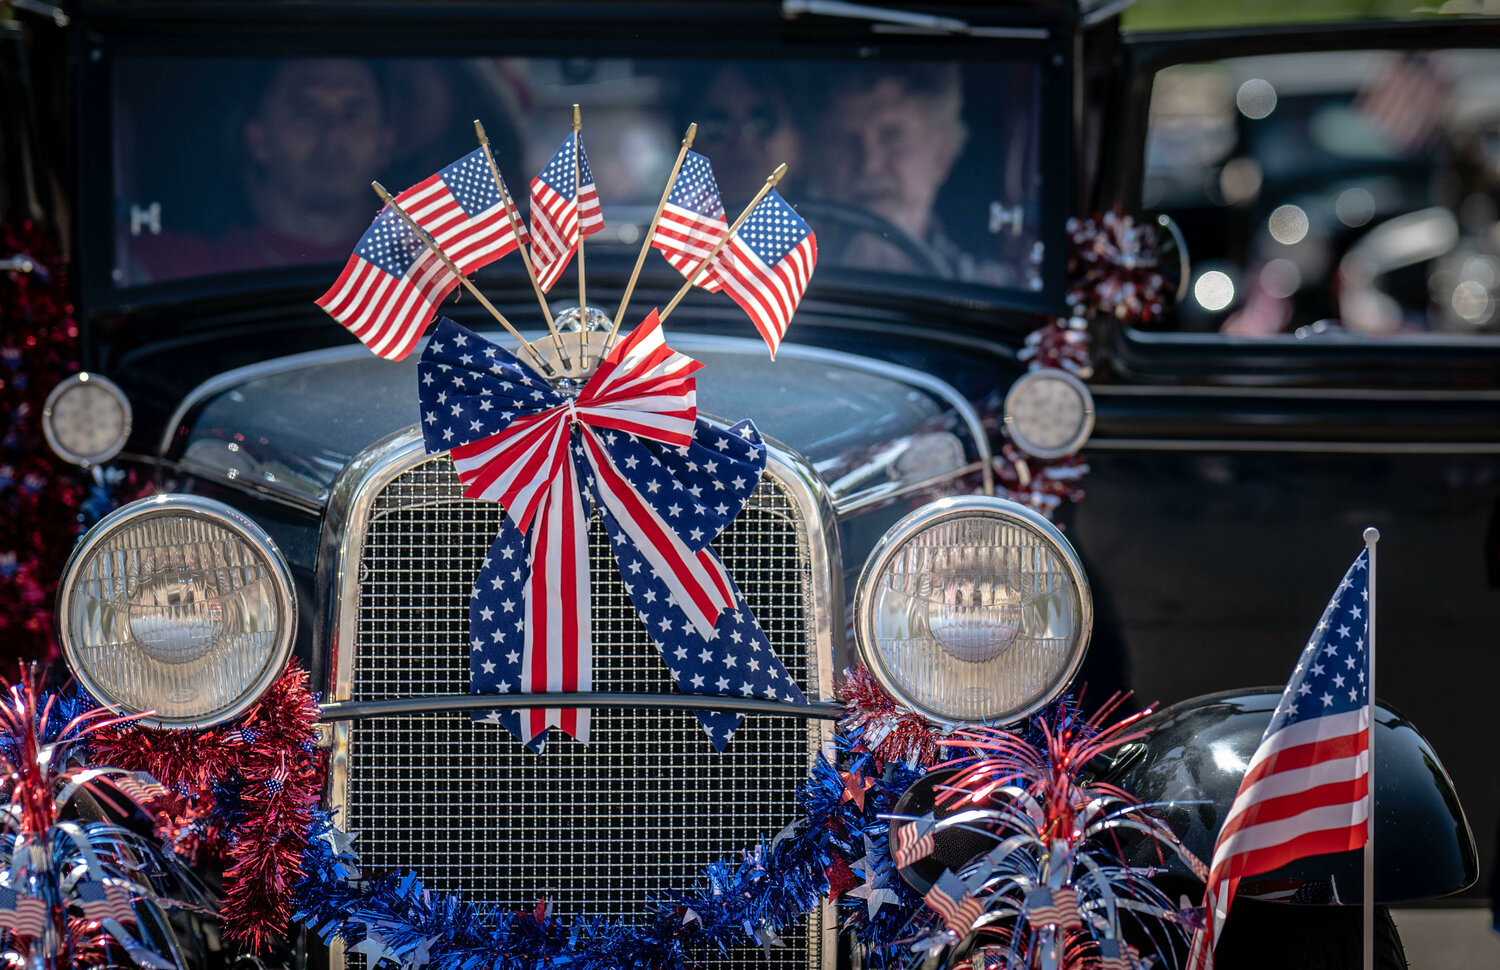 Dozens of classic cars participated in the Village of Corrales' annual Fourth of July parade. (Roberto E. Rosales/Corrales Comment)